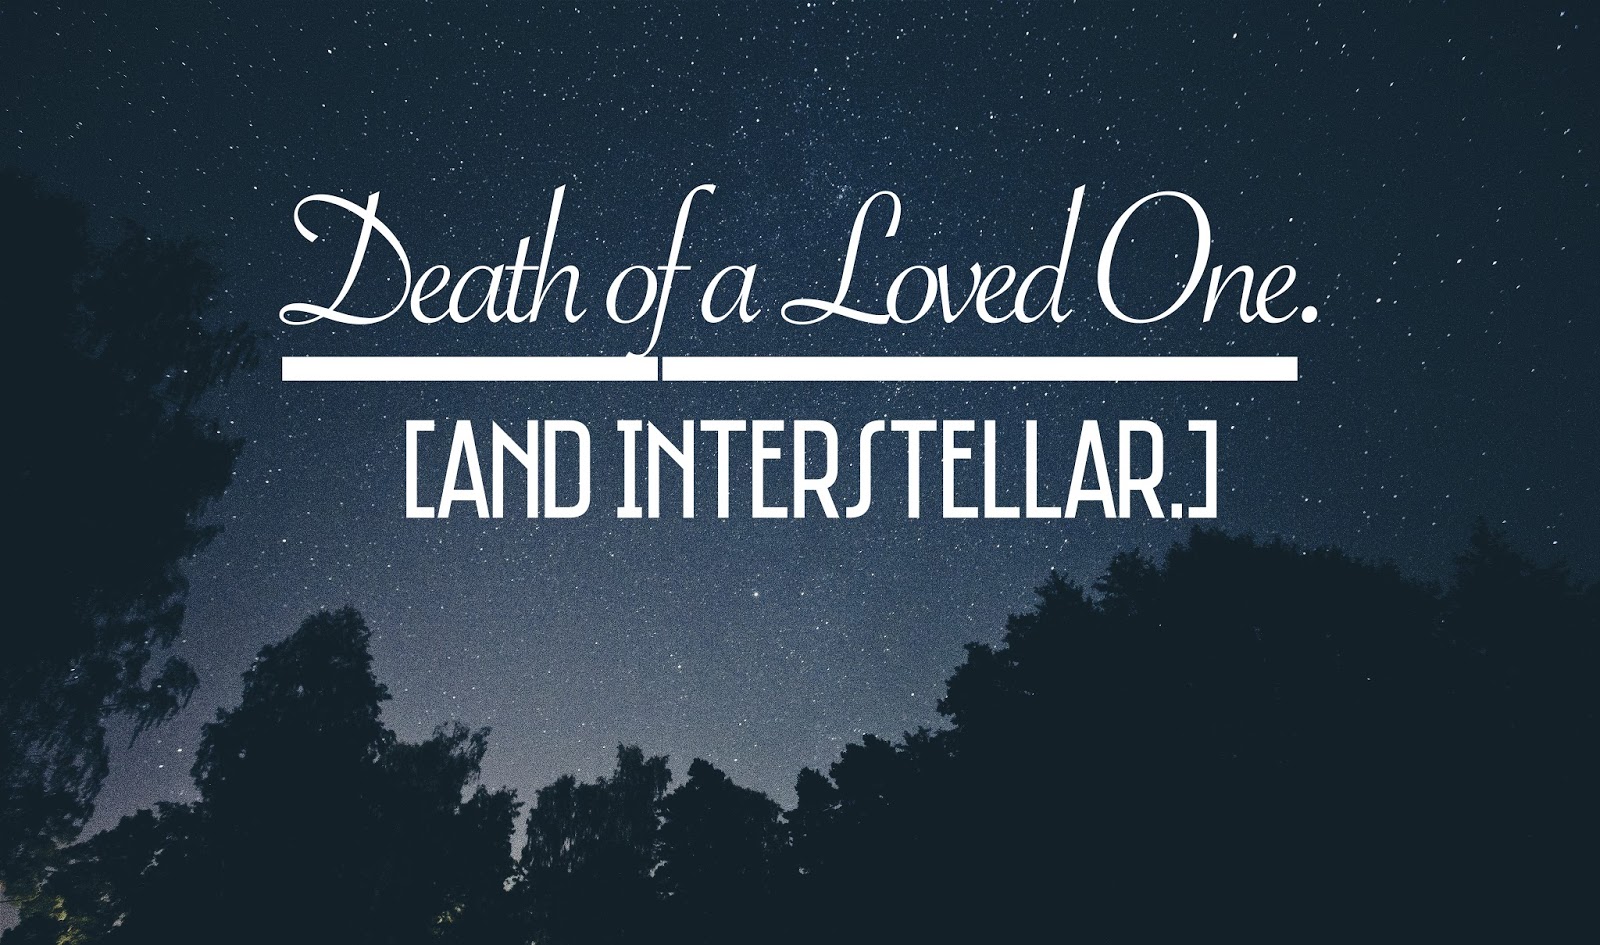 Death of a Loved One. [And Interstellar]